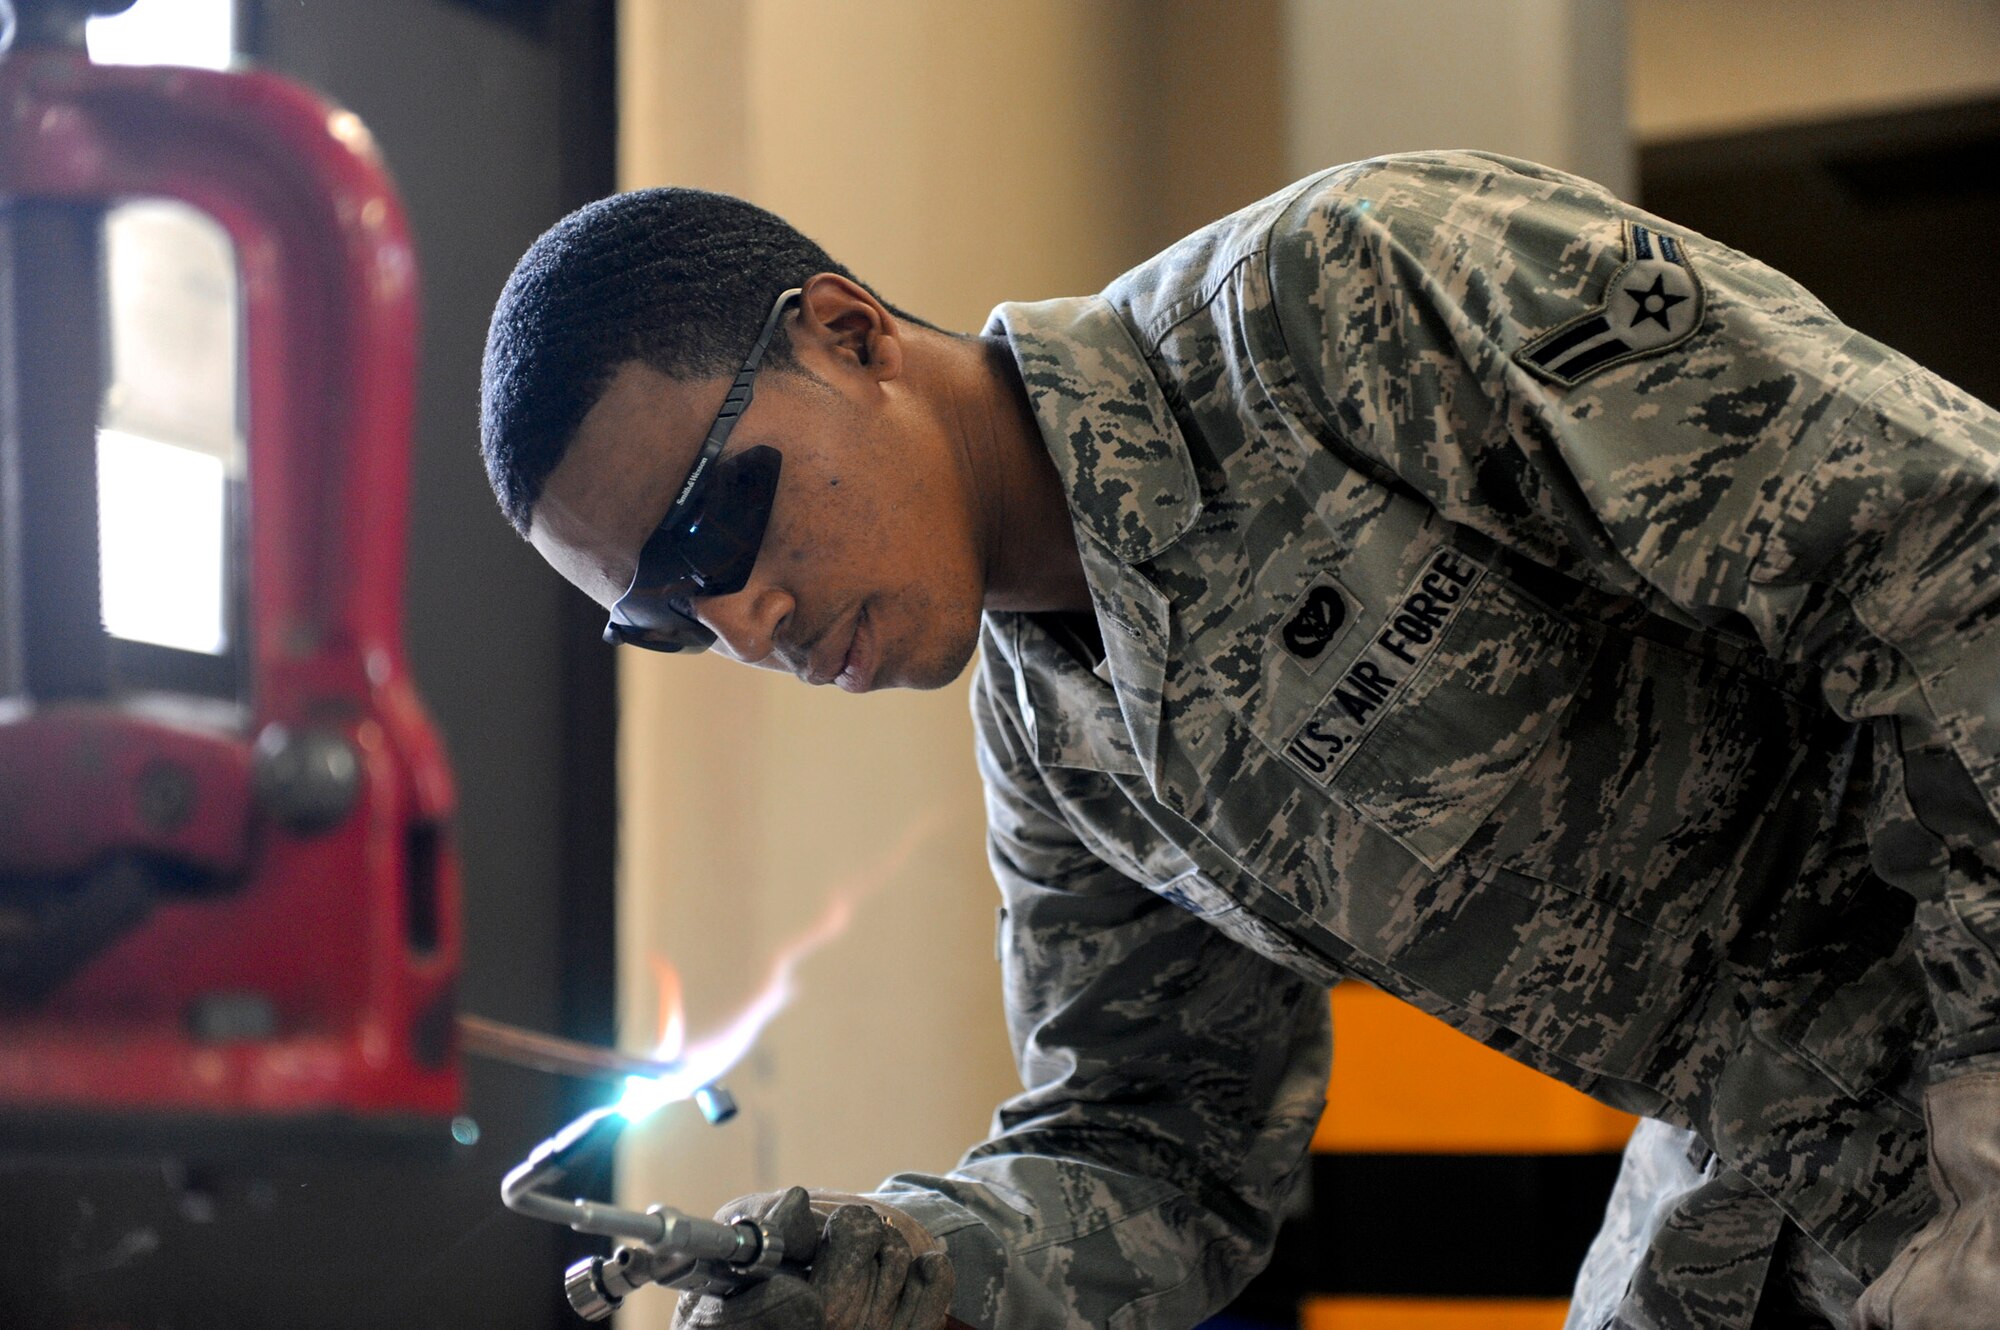 Airman 1st Class Terence Myers brazes a copper bypass line that will be installed into a liquid chiller Jan. 10, 2010, at a Navy communications facility. Airman Myers is a member of the 18th Civil Engineer Squadron's Operations Flight, which was recently awarded the 2010 Major General Clifton D. Wright Award for flight members' outstanding accomplishments in 2010. (U.S. Air Force photo/Staff Sgt. Jonathan Steffen) 